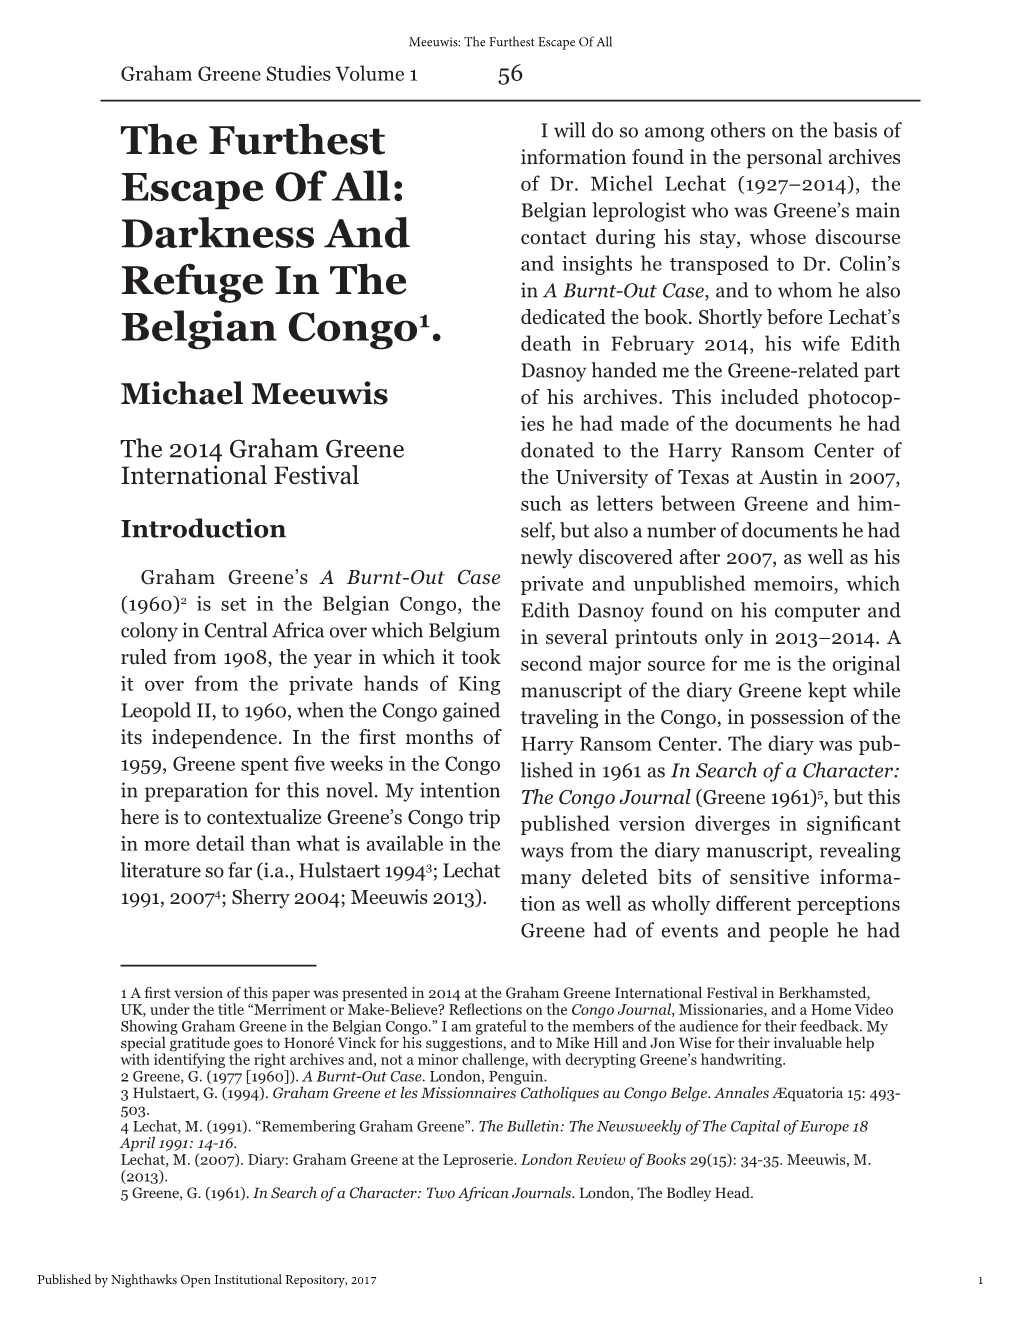 Darkness and Refuge in the Belgian Congo